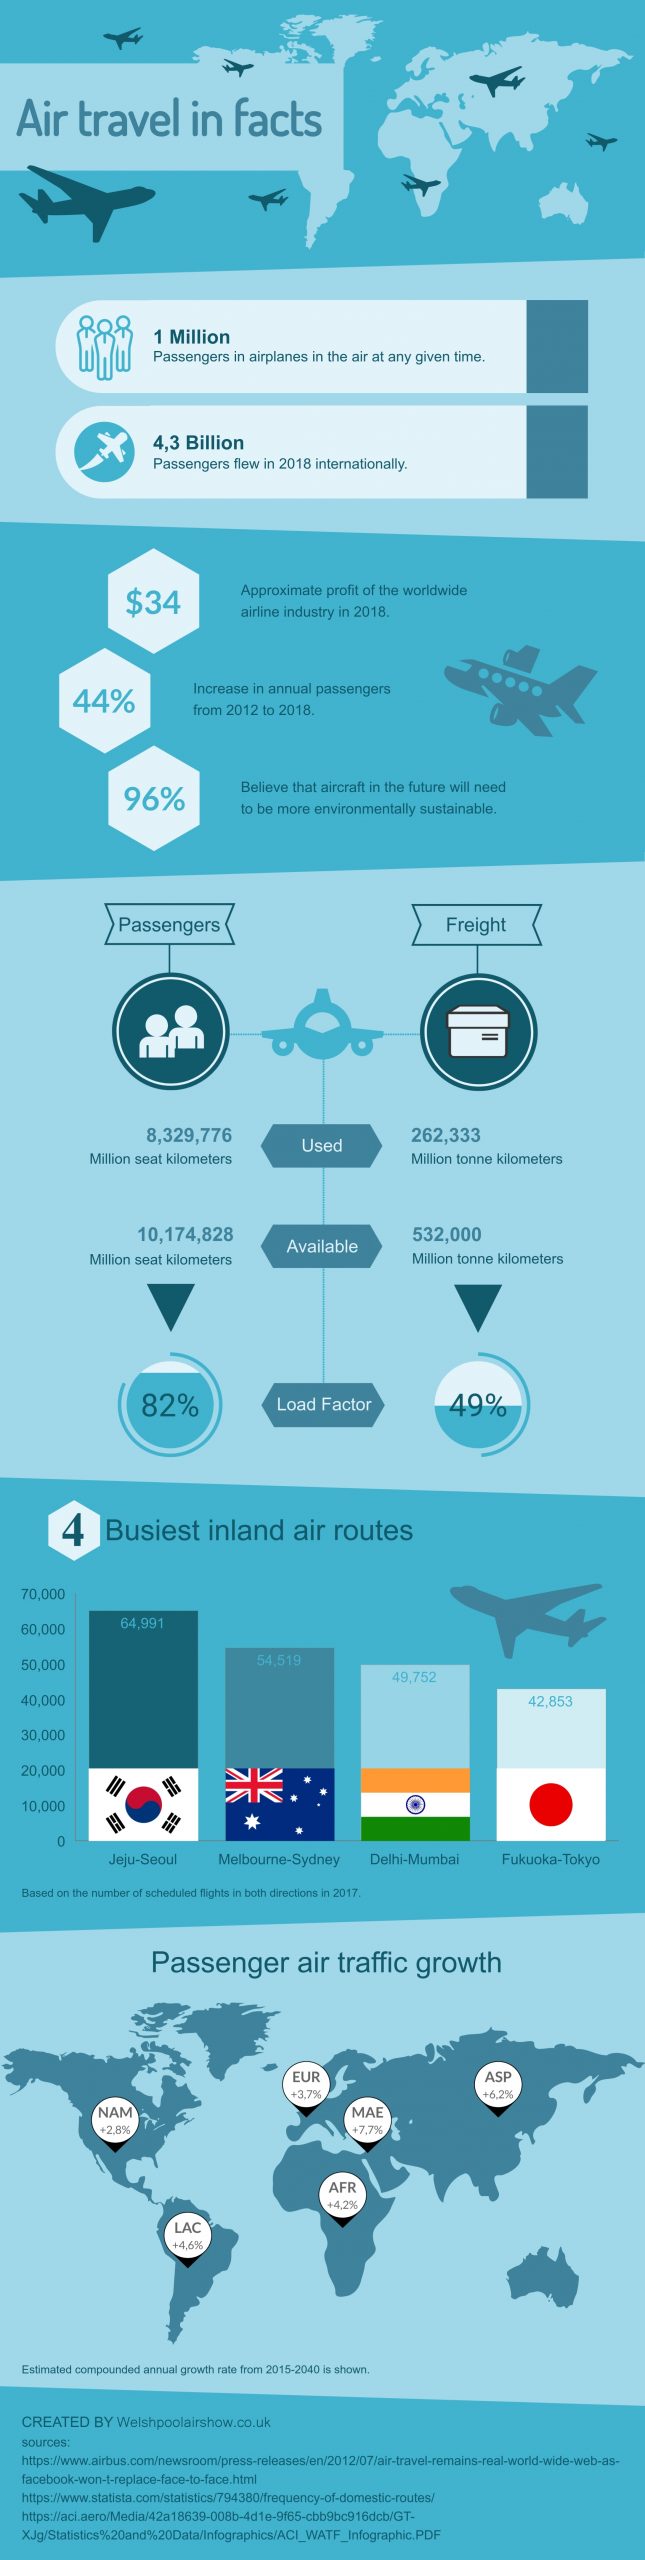 Air travel in facts infographic